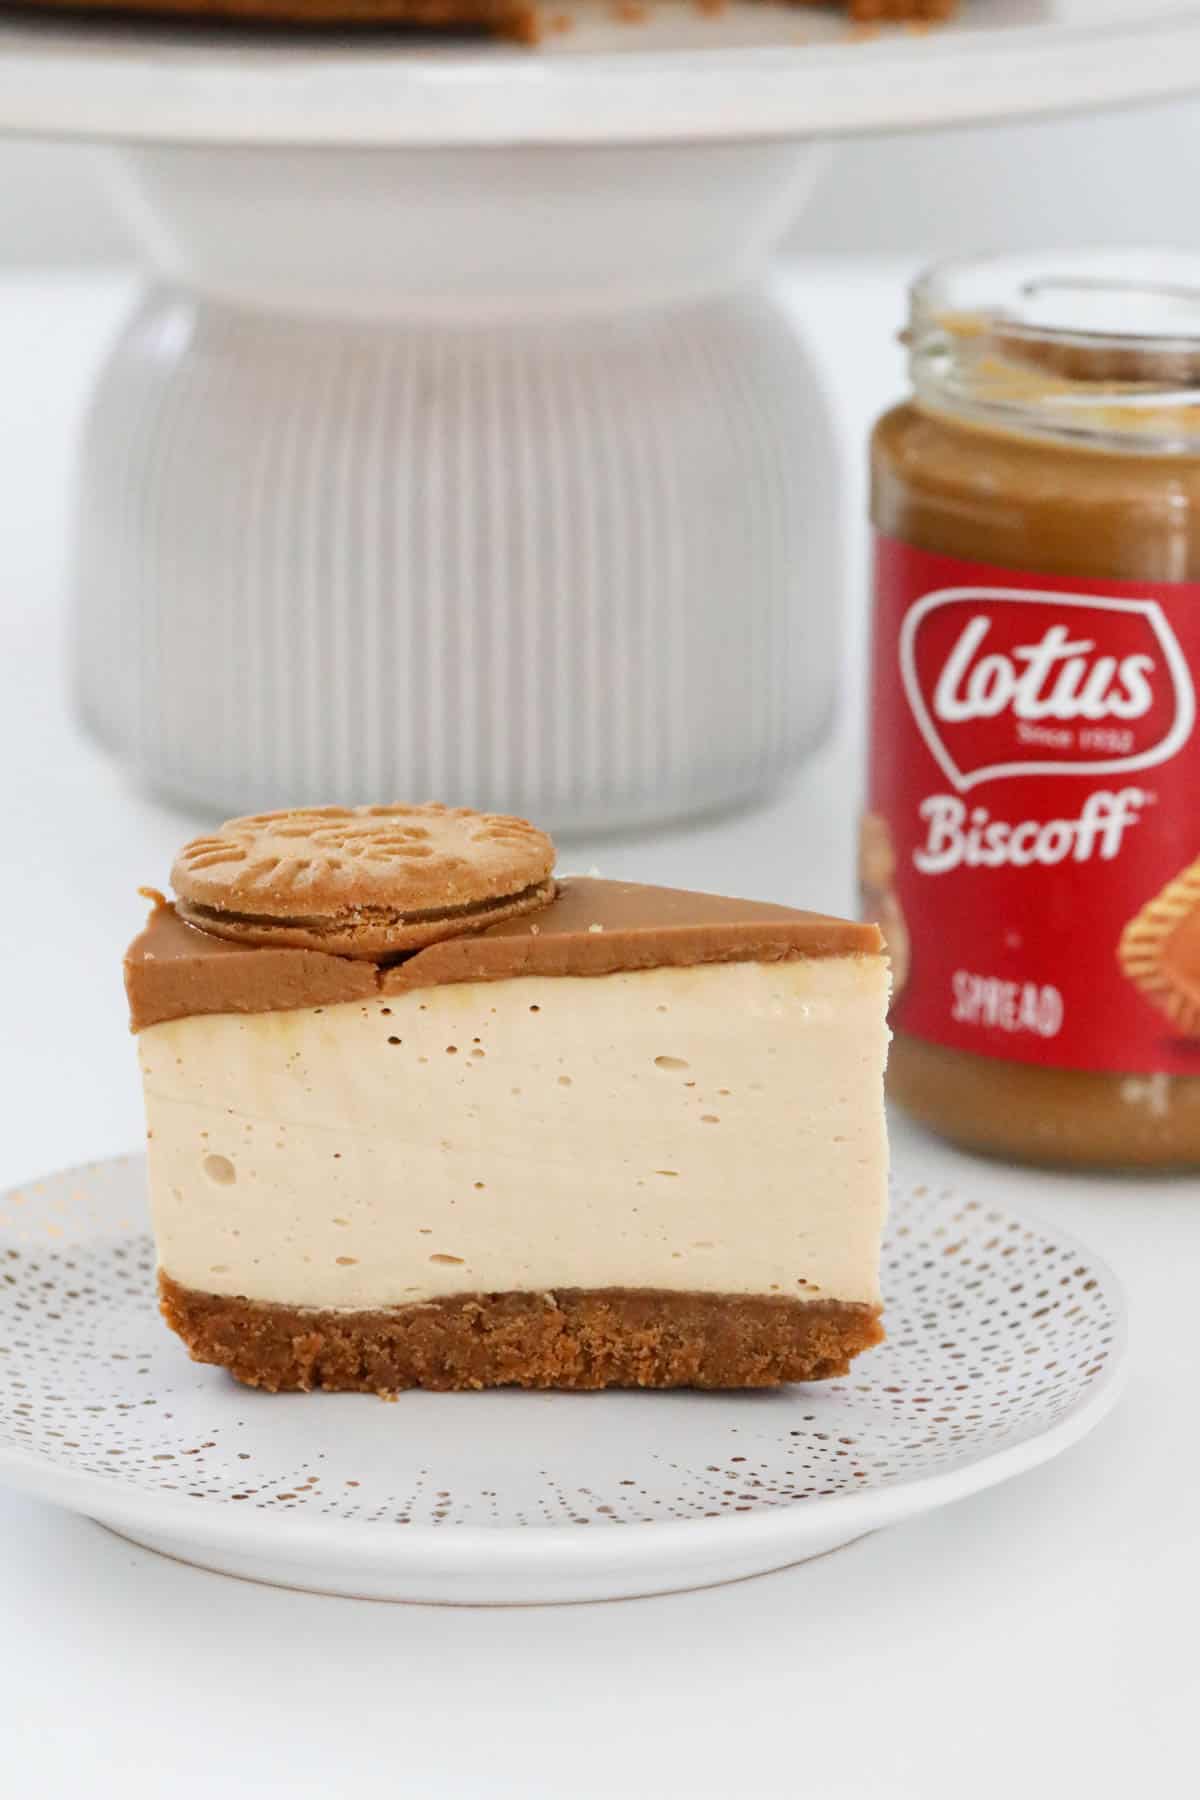 A slice of cheesecake with a jar of Lotus Biscoff spread in the background.